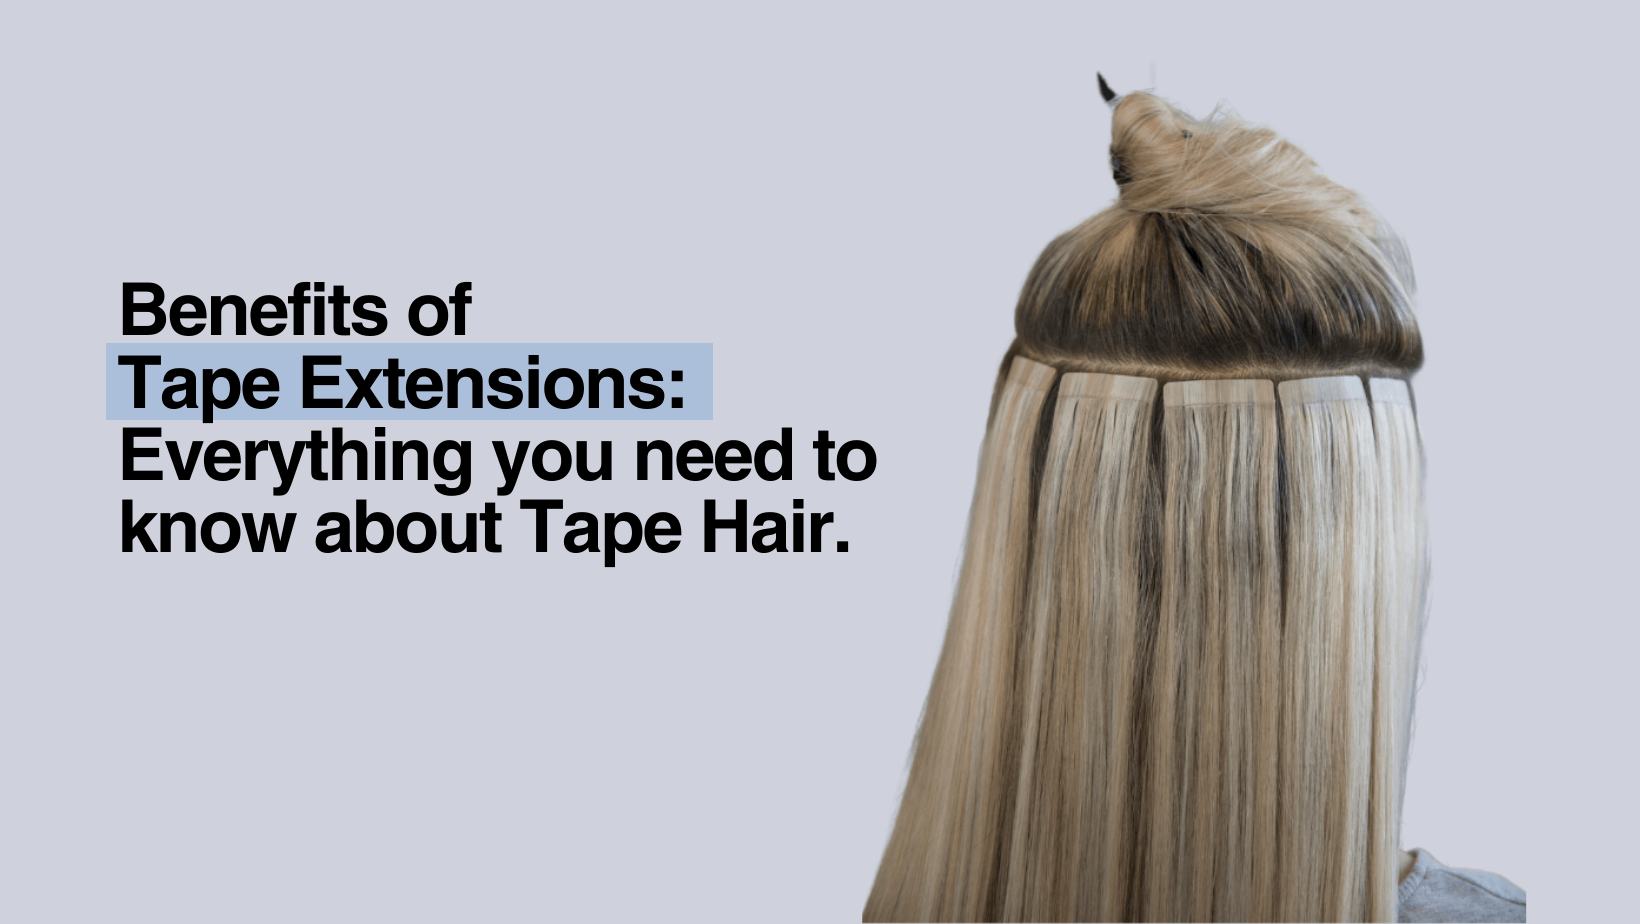 Benefits Of Tape Extensions: Everything You Need To Know About Tape Hair